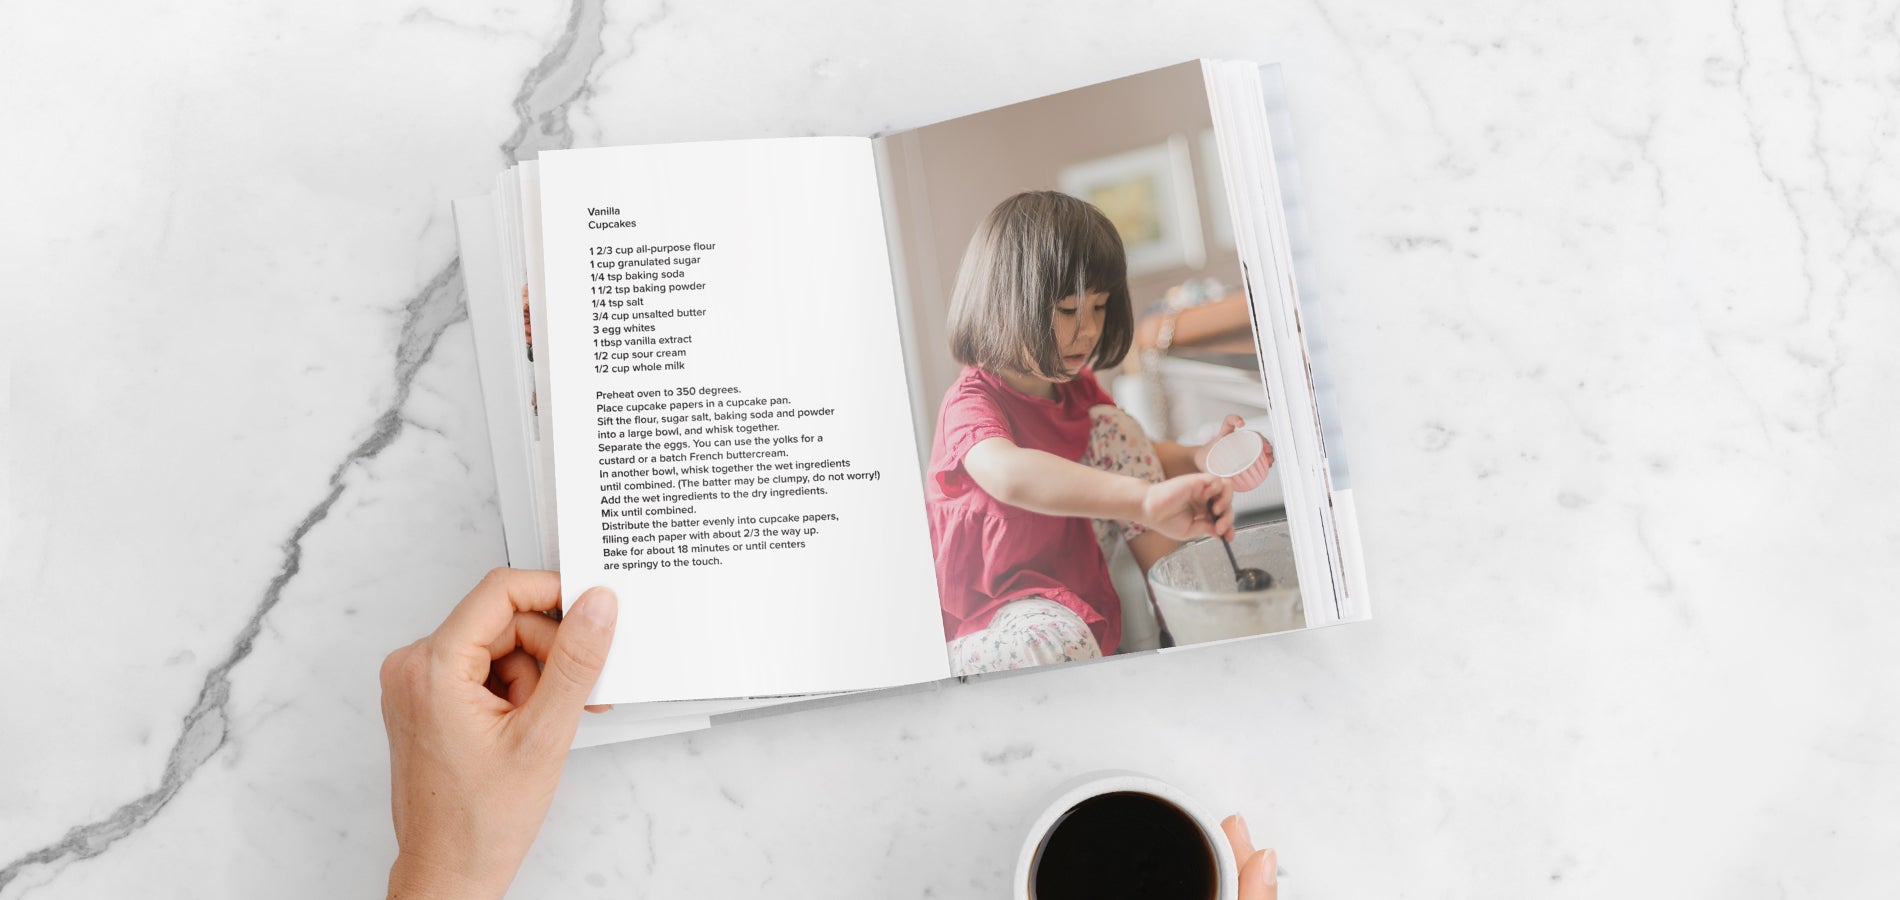 DIY recipe book with photo of little girl making cupcakes